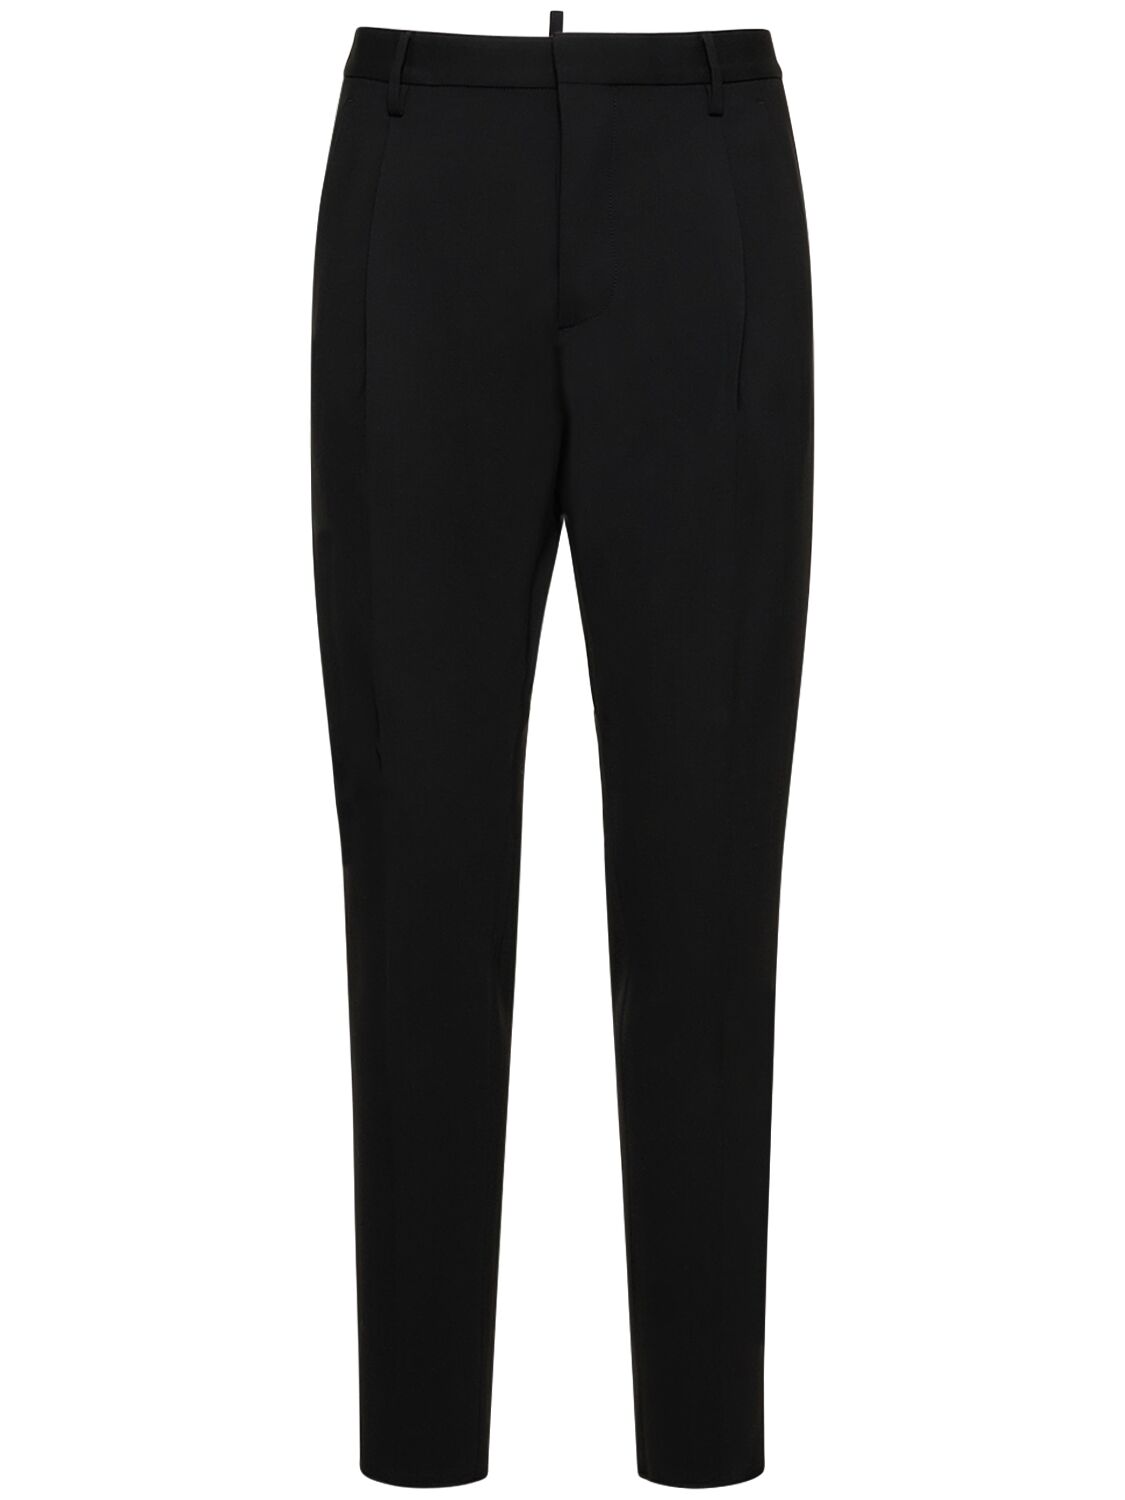 Image of Ceresio 9 Stretch Wool Pants